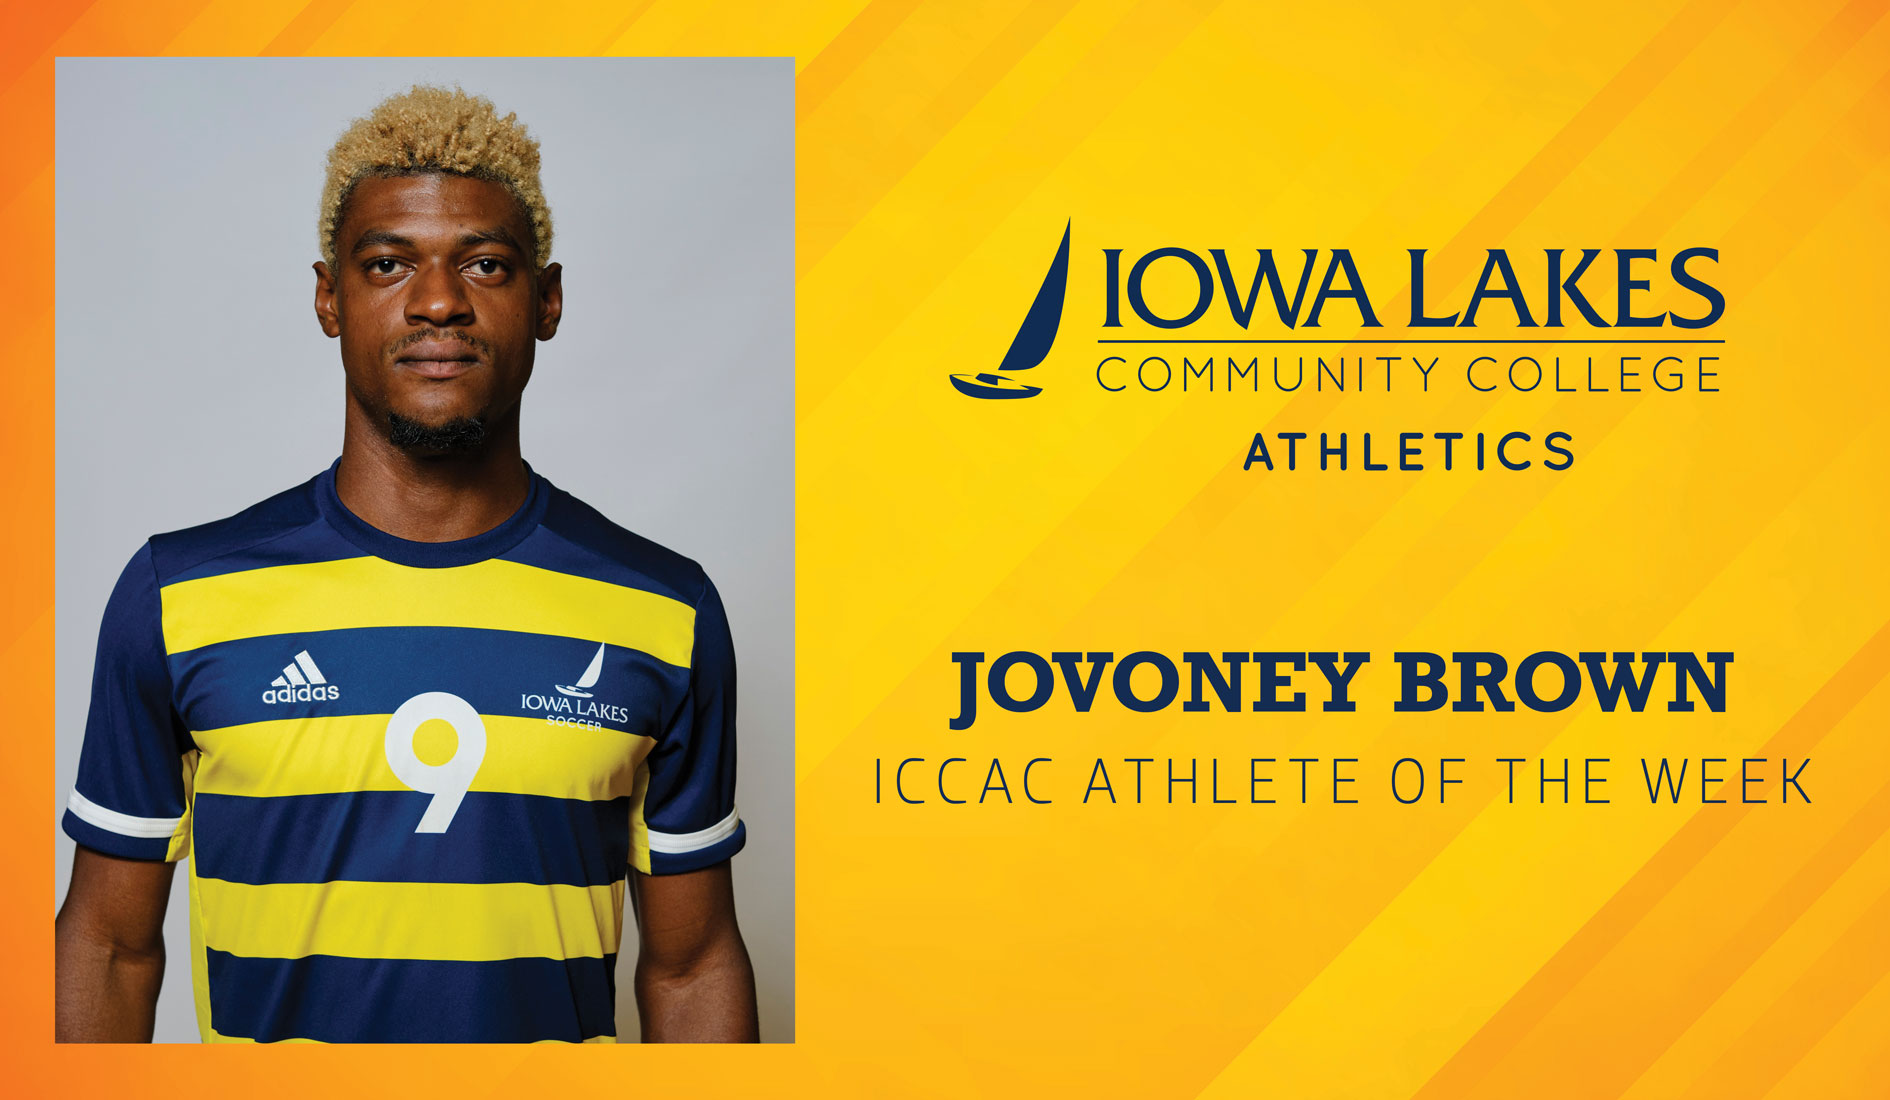 JOVONEY BROWN NAMED ICCAC ATHLETE OF THE WEEK, FOR  SECOND WEEK IN A ROW